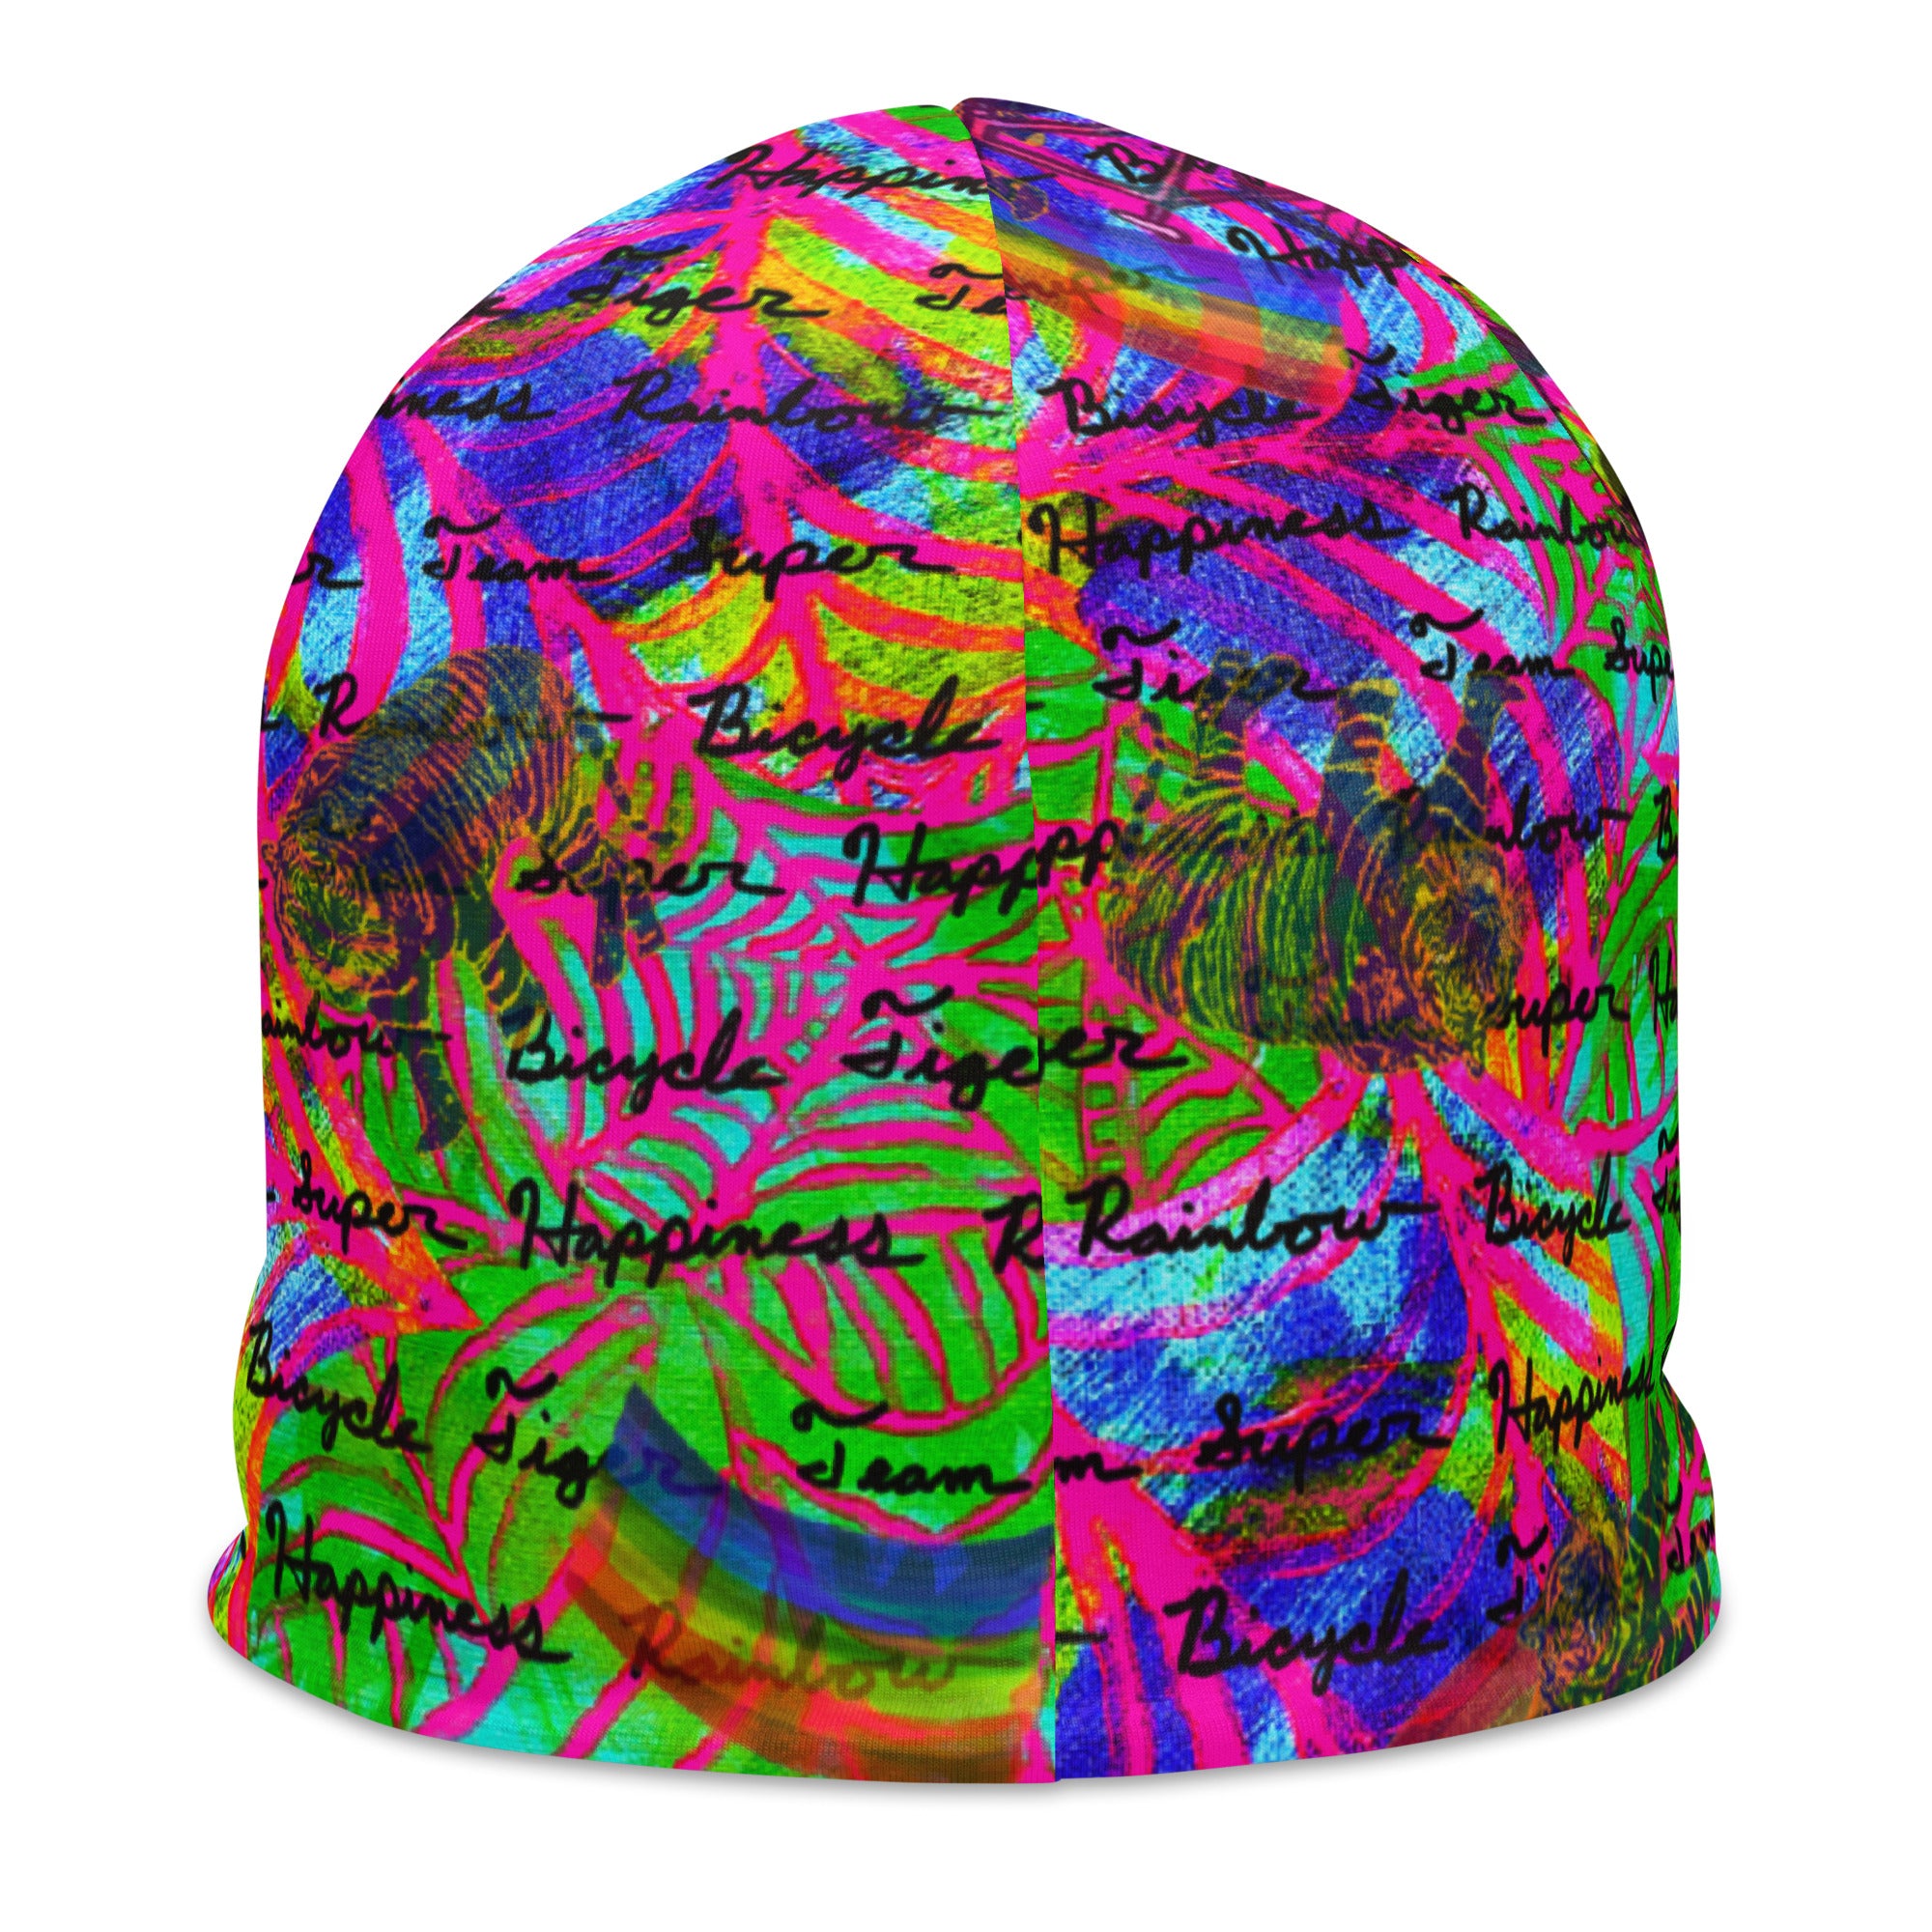 TEAM SUPER HAPPINESS RAINBOW BICYCLE TIGER All-Over Print Beanie